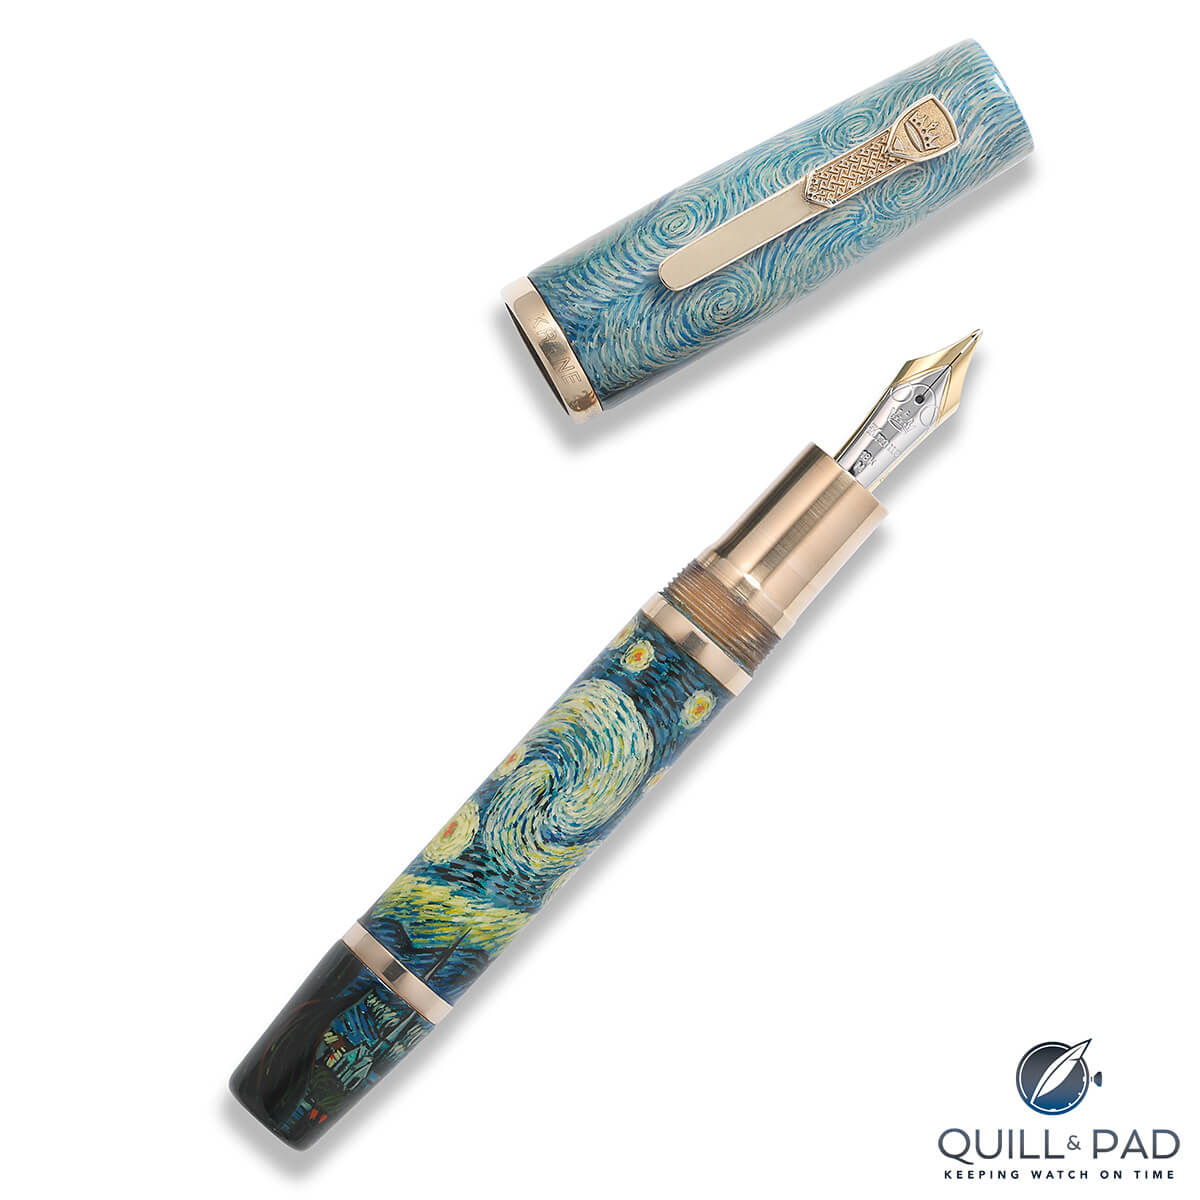 Krone limited edition fountain pen commemorating Vincent Van Gogh